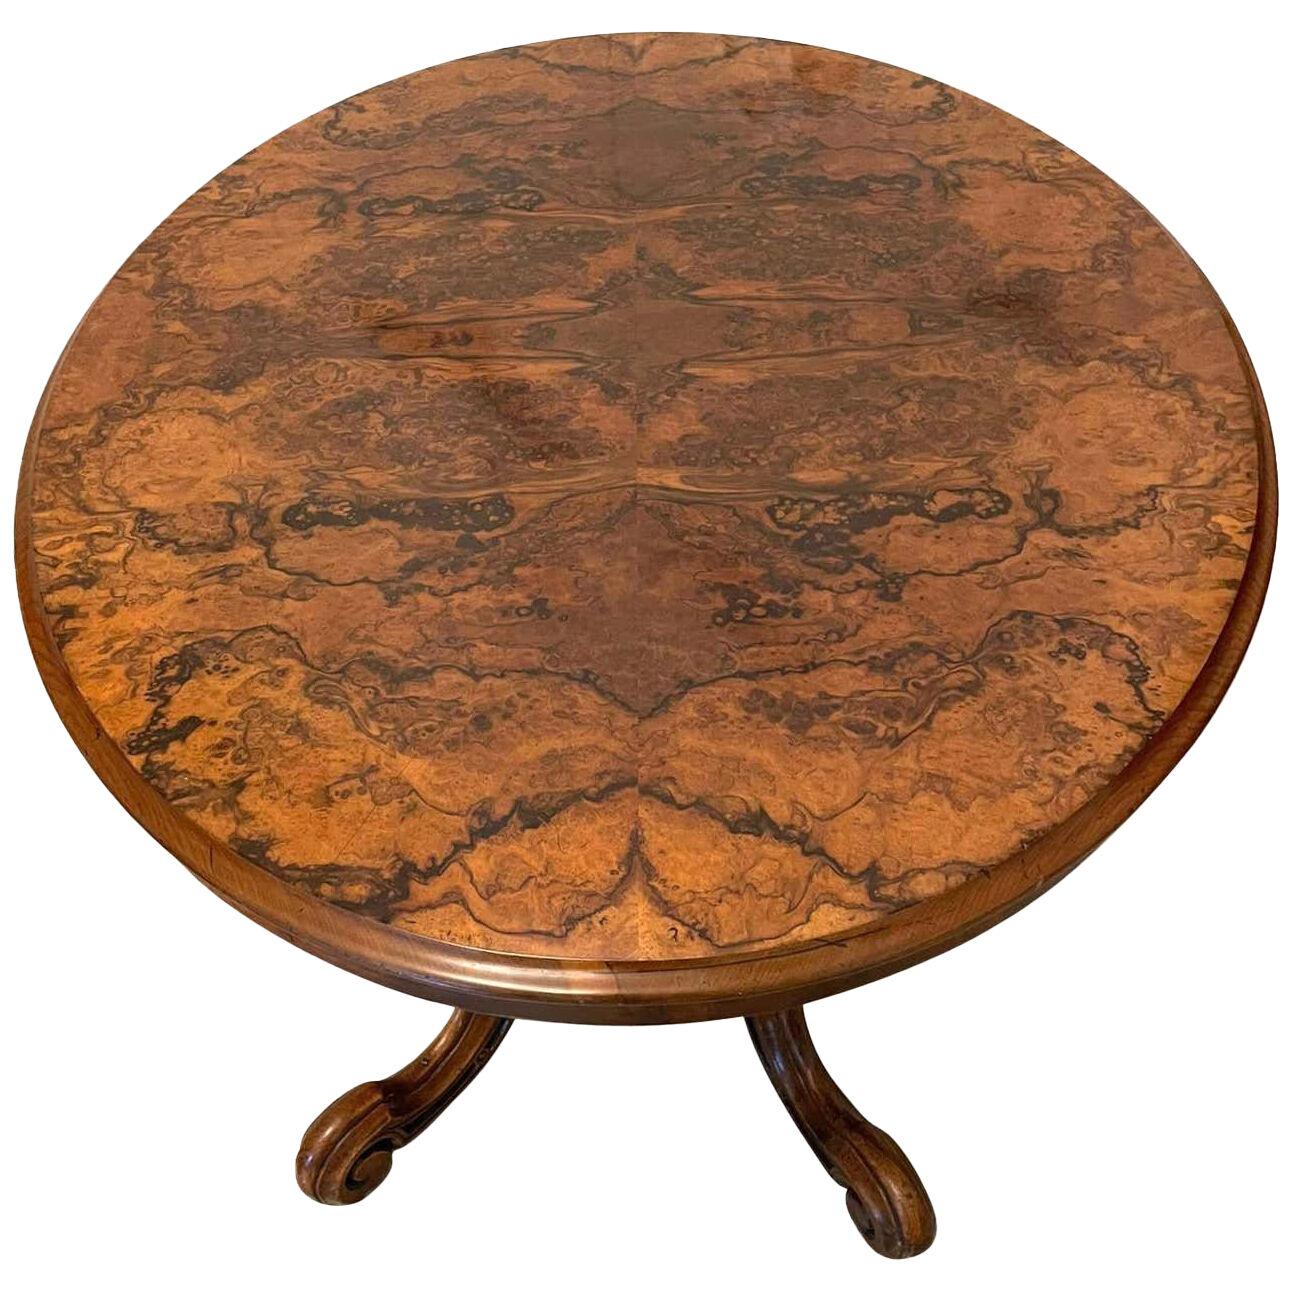 Outstanding Quality Antique Victorian Oval Burr Walnut Centre Table